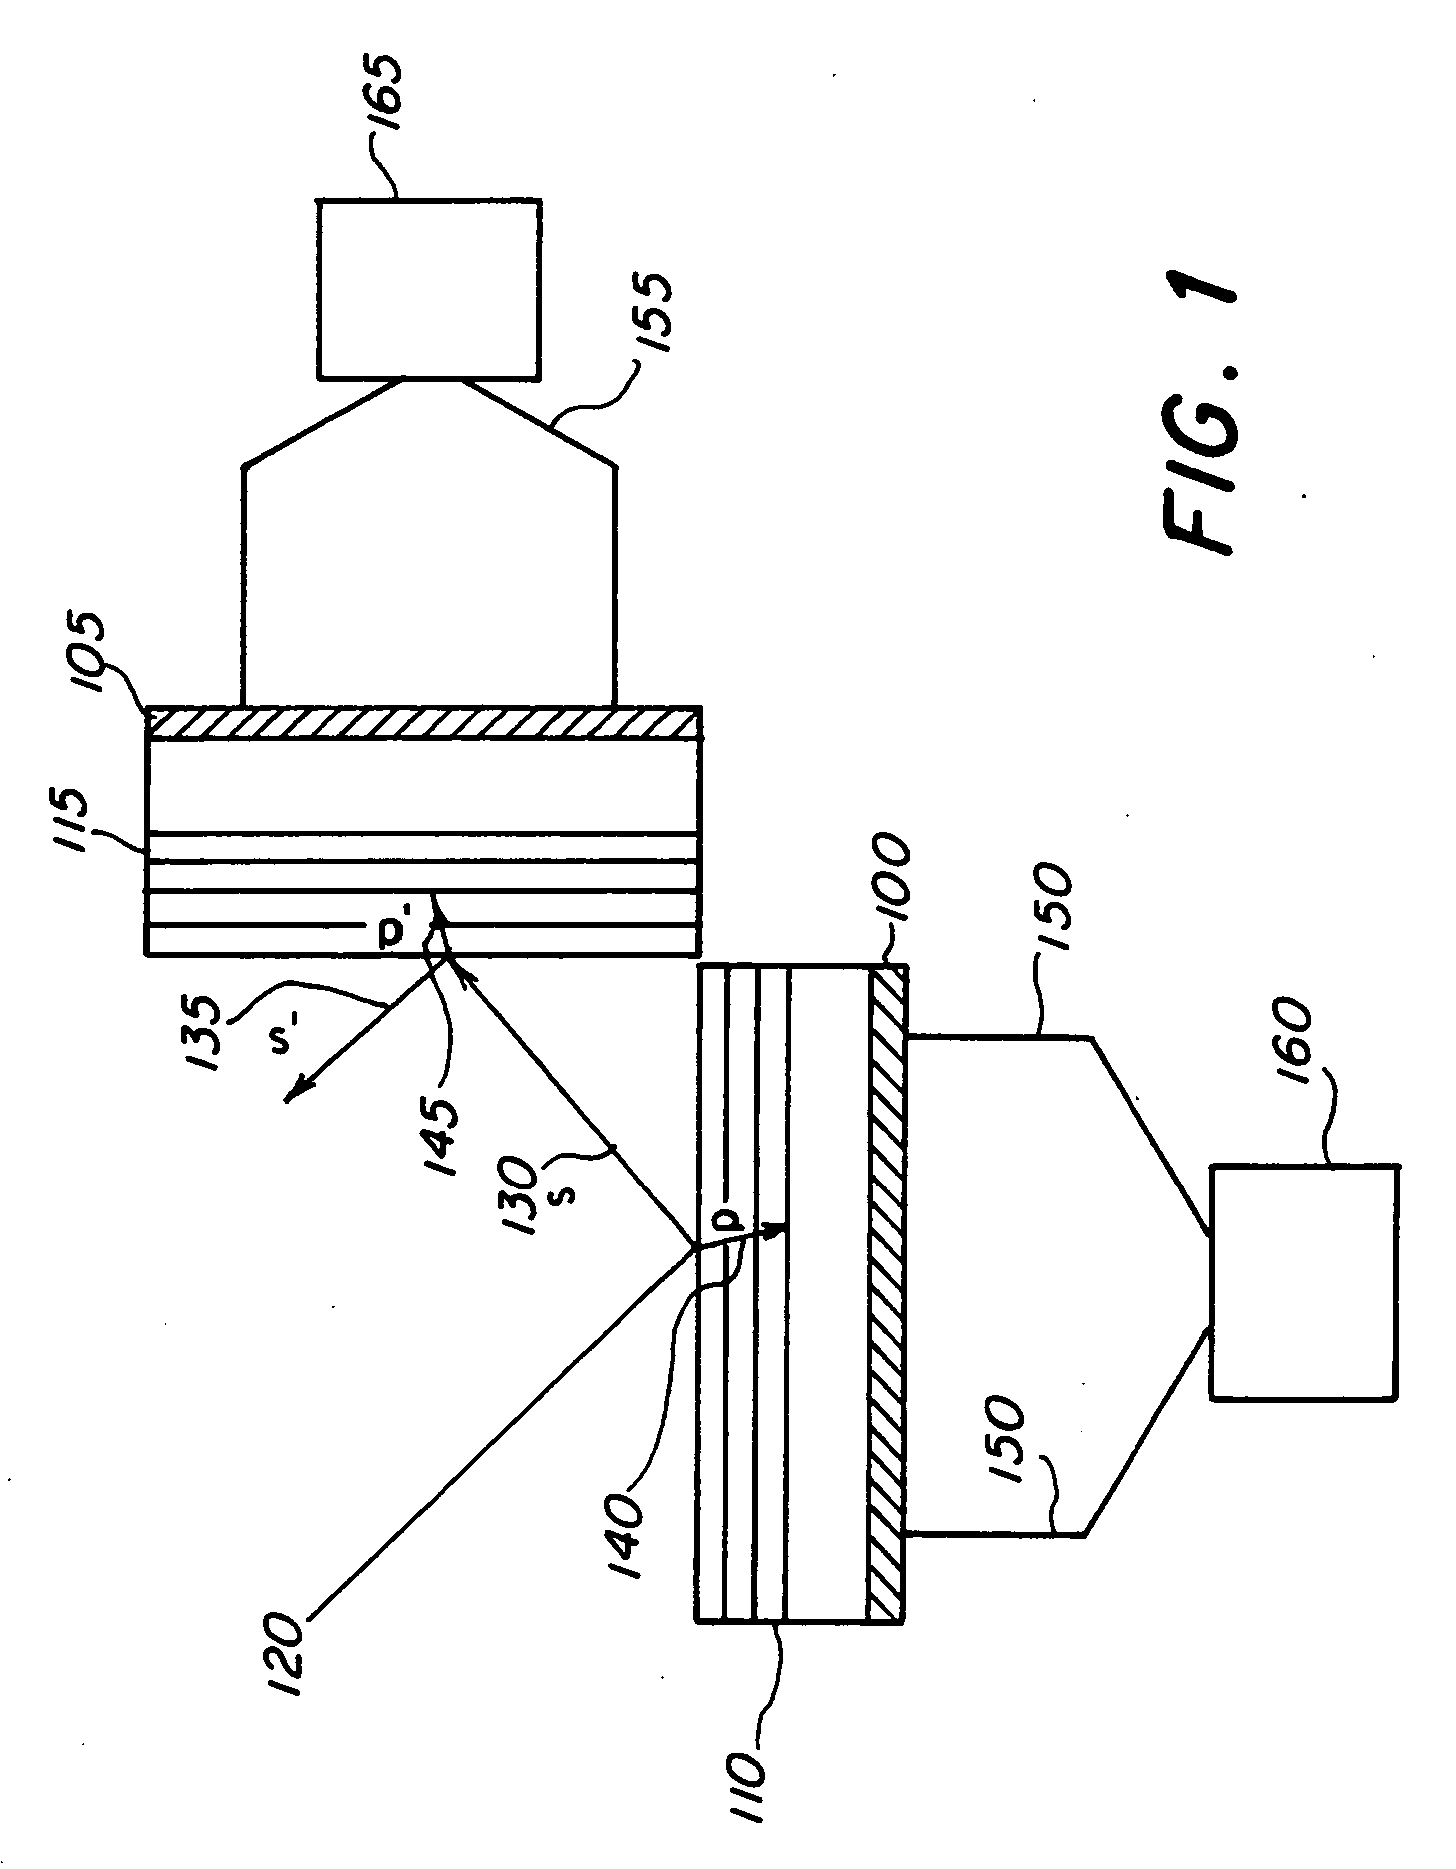 Multilayer polarization sensor (MPS) for x-ray and extreme ultraviolet radiation